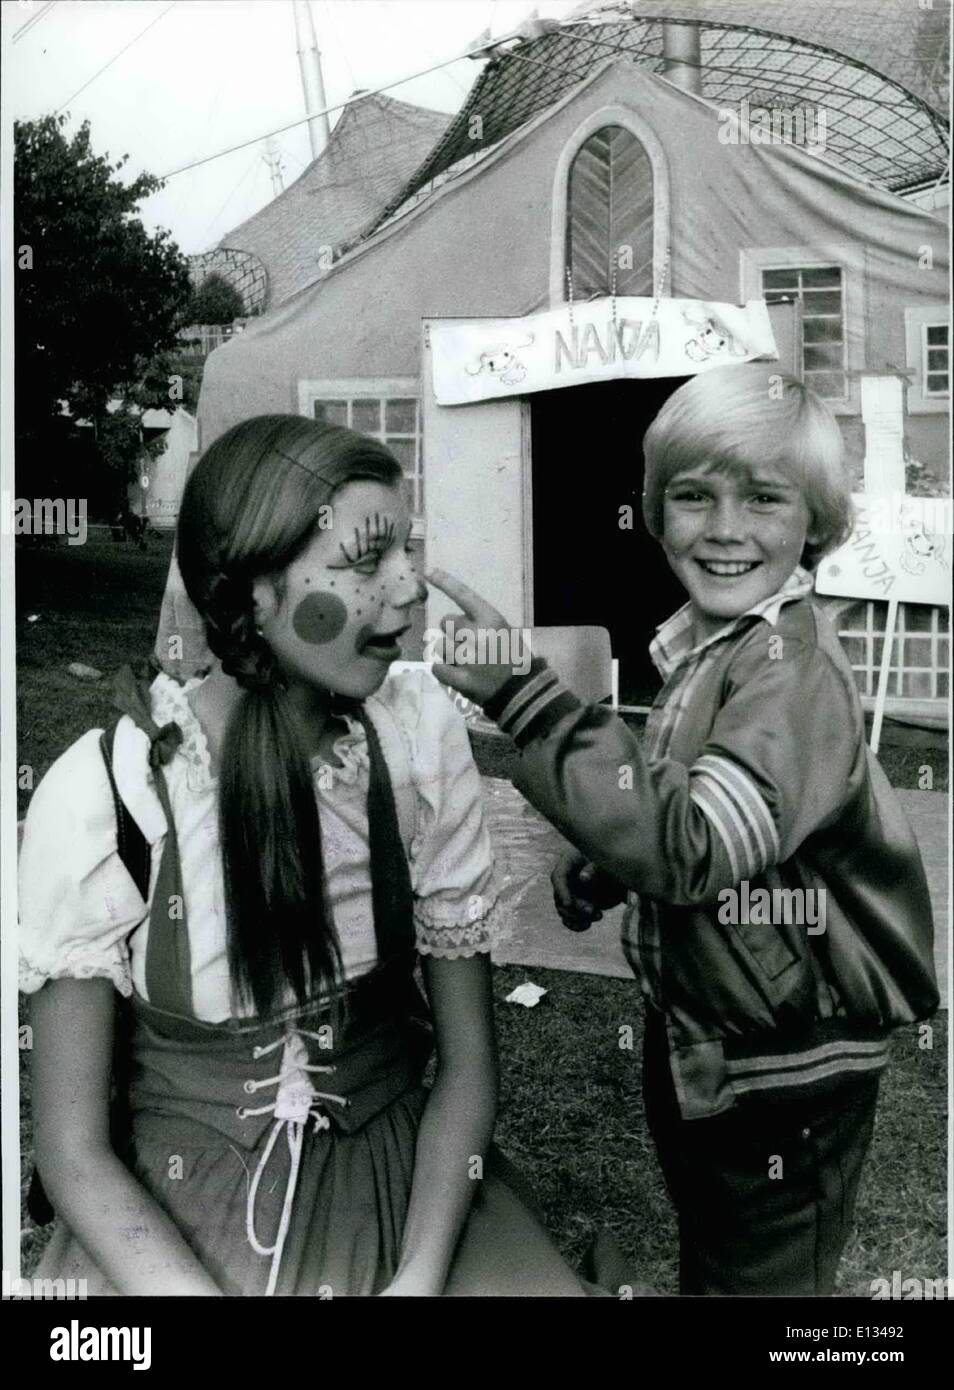 Feb. 28, 2012 - Children star Ricky schroder from USA in Munich the children star form USA: at all nine years old buried on a head the ''Champ'', his newest film. This strip produced by the famous film-director Franco Zeffirelli will start on the 26th October, 1979 in west Germany. The fair-haired freckled Richy who was selected out of 2000 candidates is playing in the ''Champ'' the son of an growing old professional fighter who try a comeback for the sake of his junior who admire. him very much and his fondest wish is that his daddy will be back again as a brightful winner in the ring Stock Photo